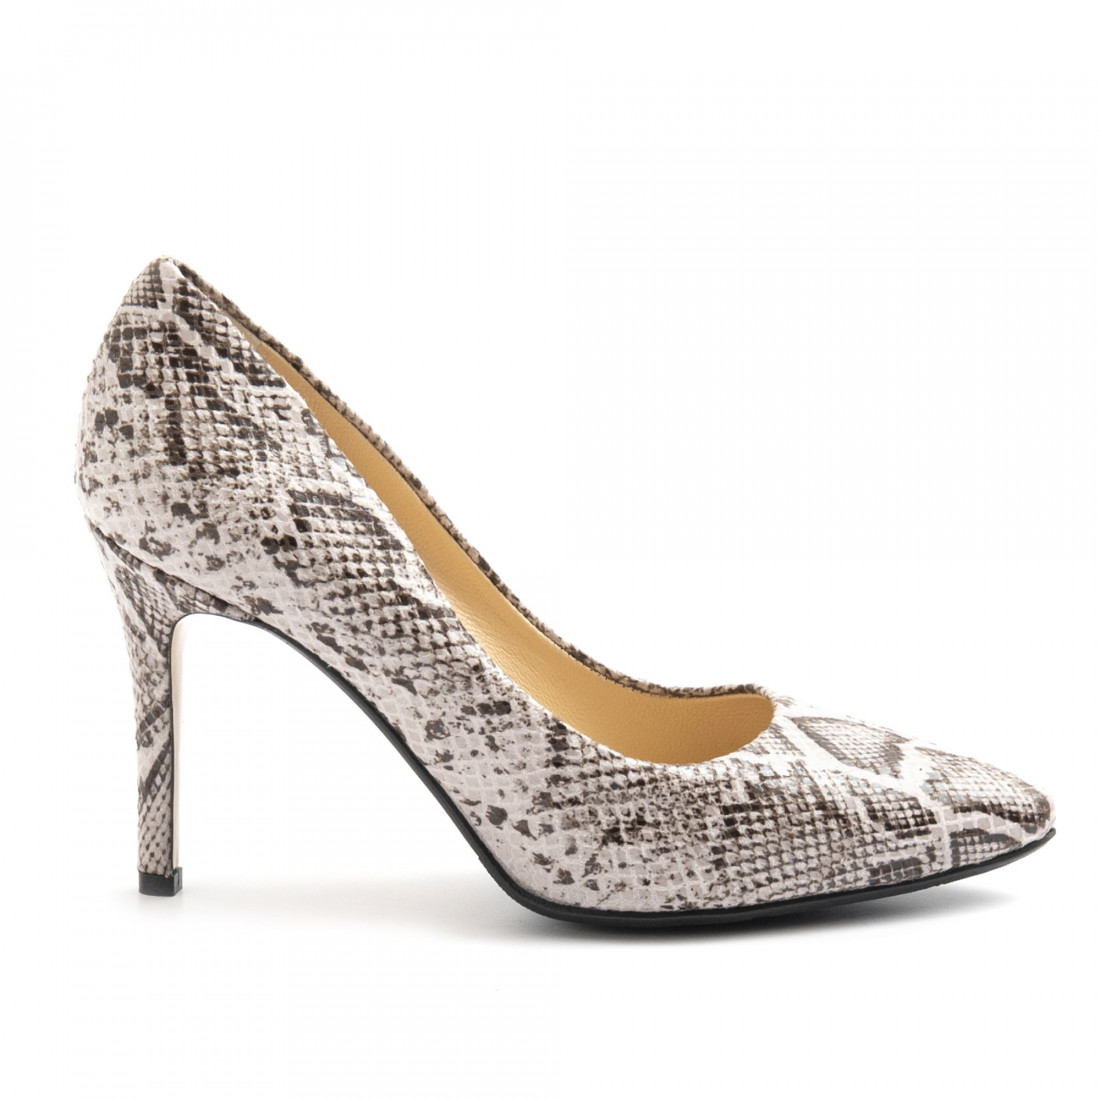 Snake-printed off white leather L'Arianna pump